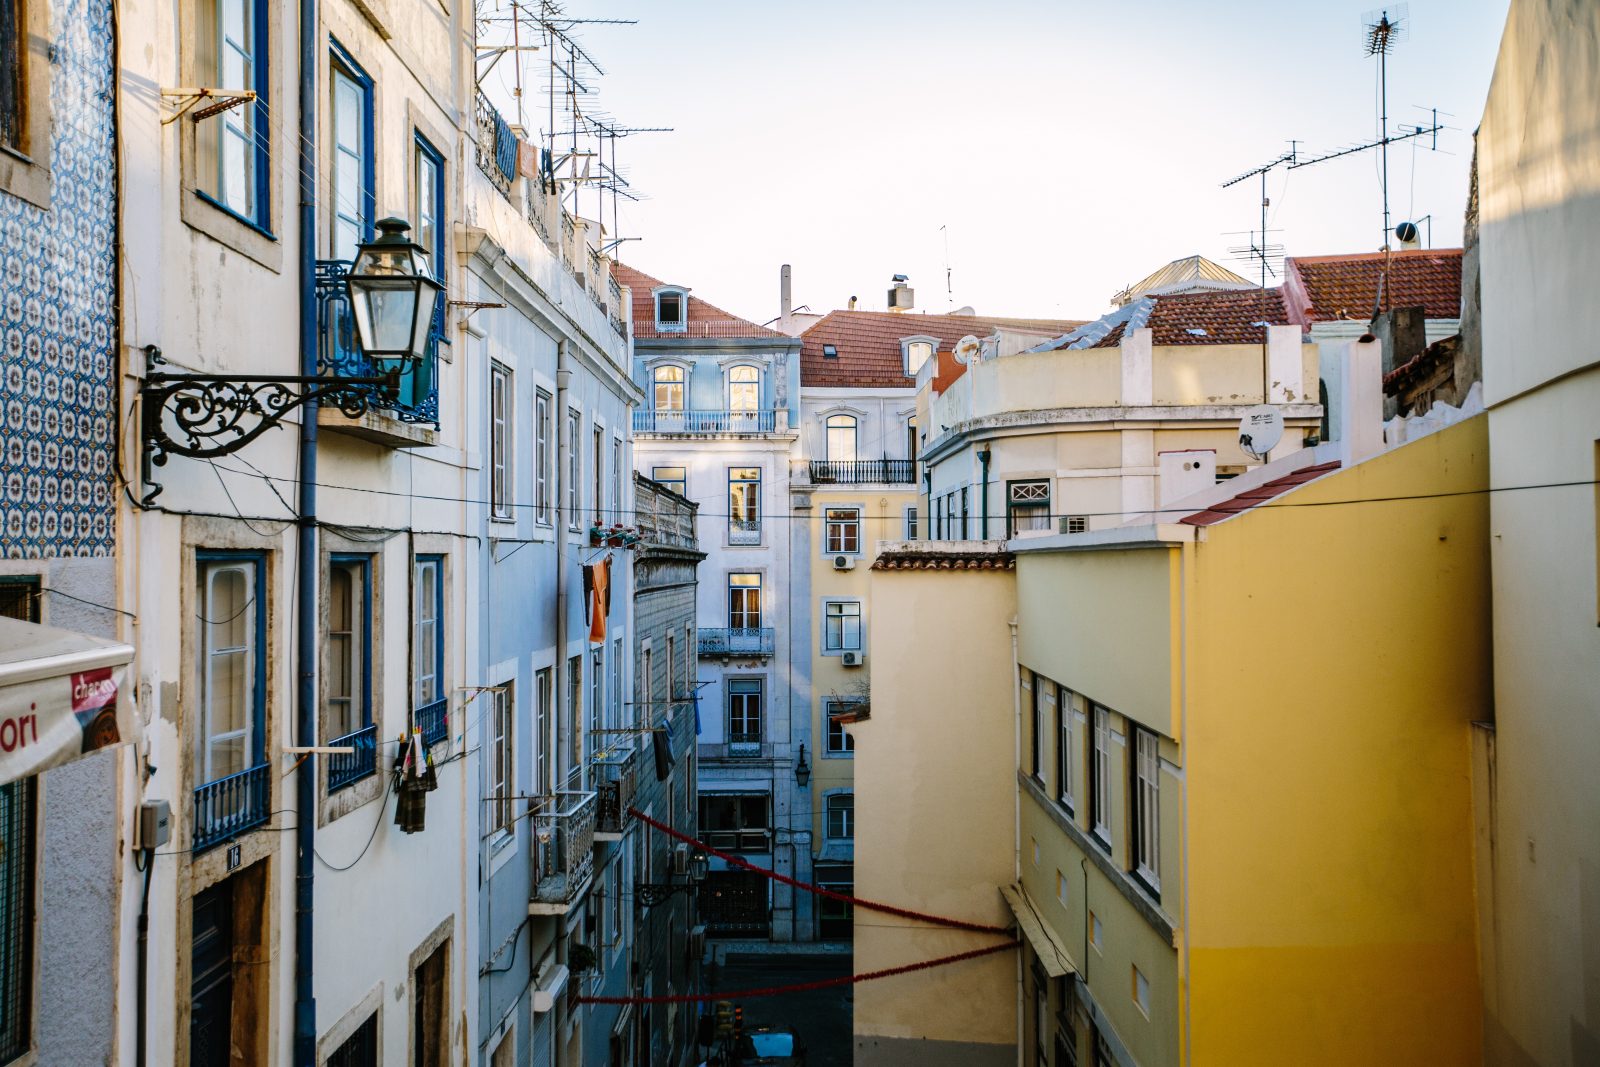 Lisbon for digital nomads: Why Lisbon Is The Place To Be As A Digital Nomad